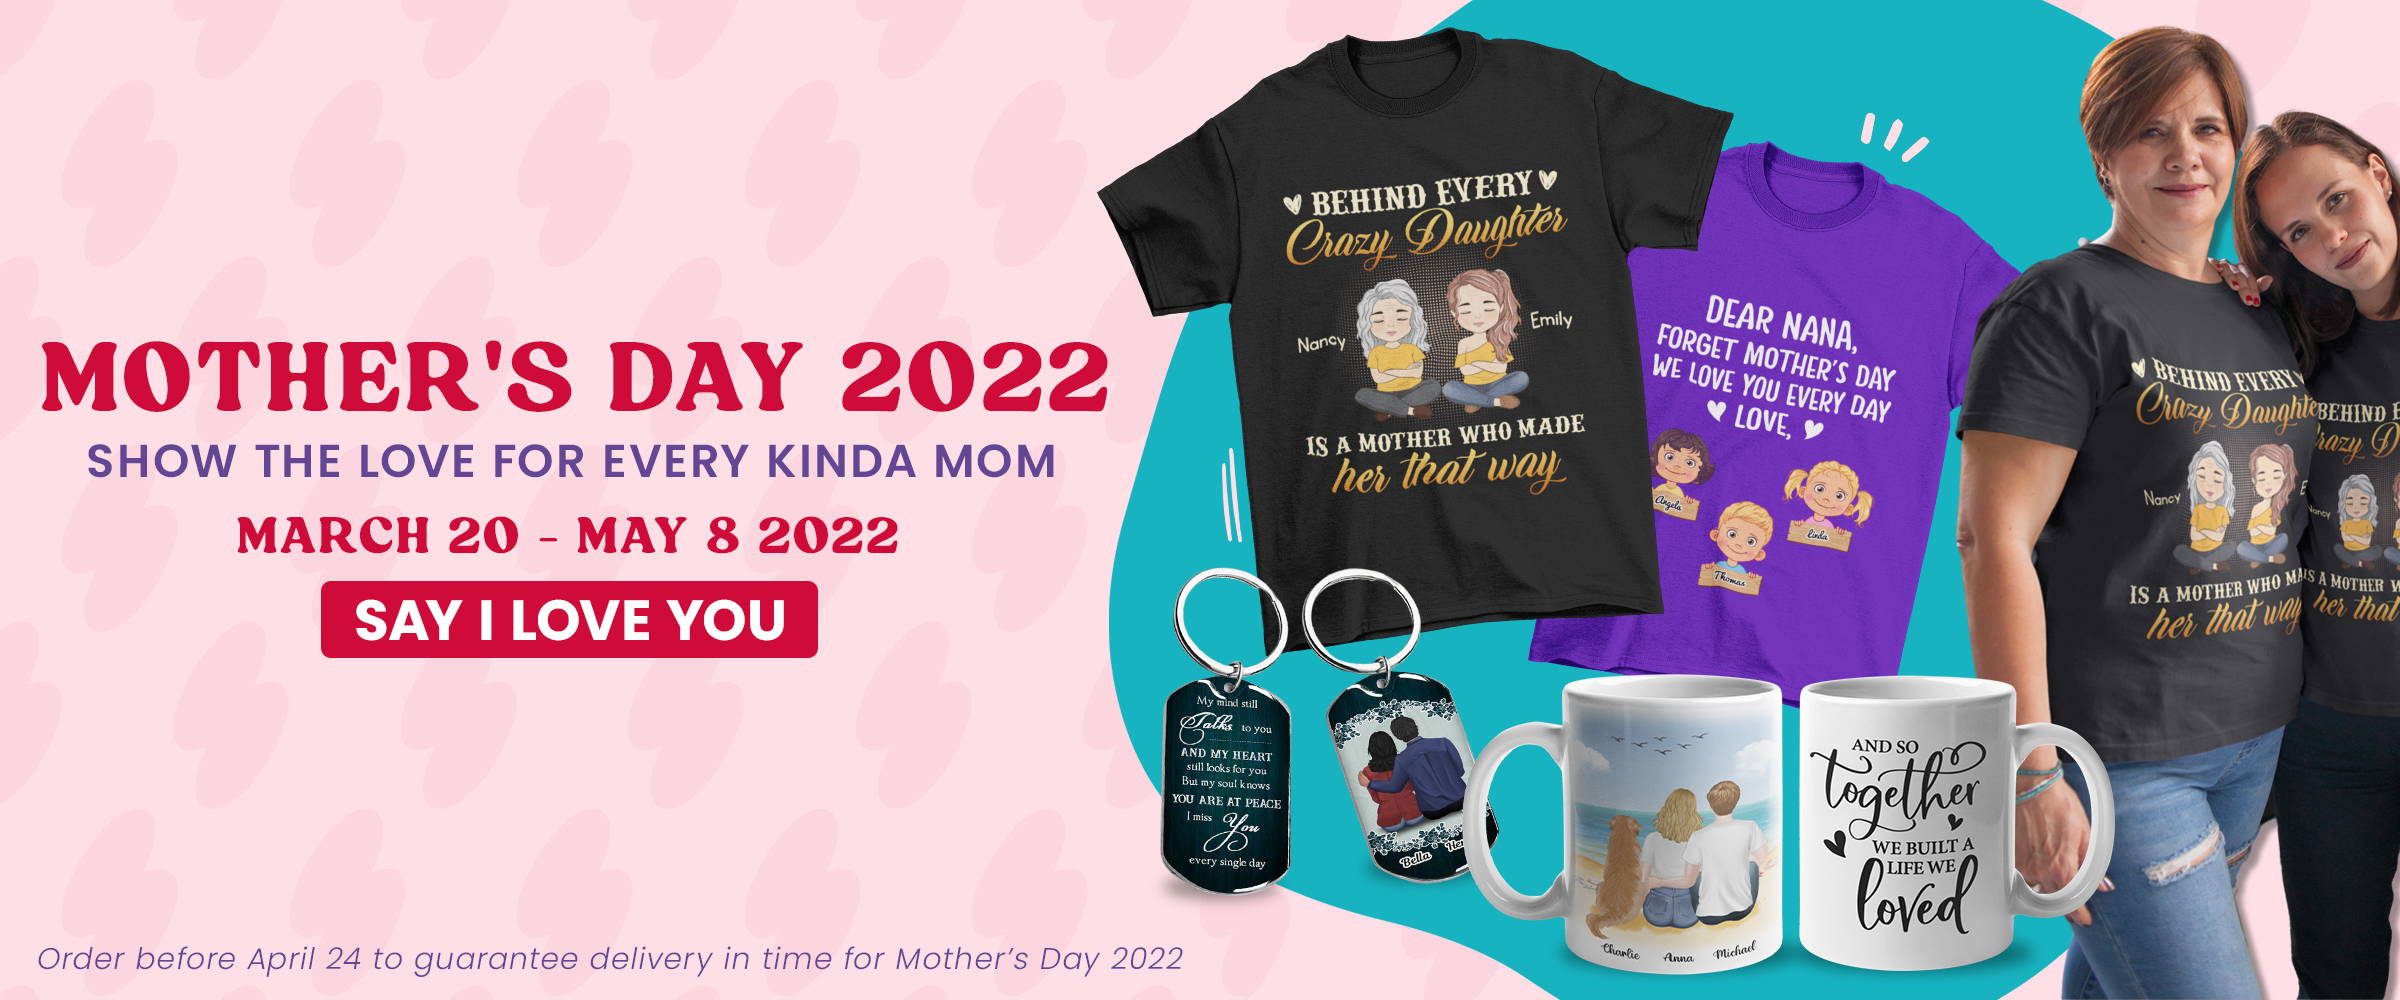 MOTHER'S DAY GIFTS